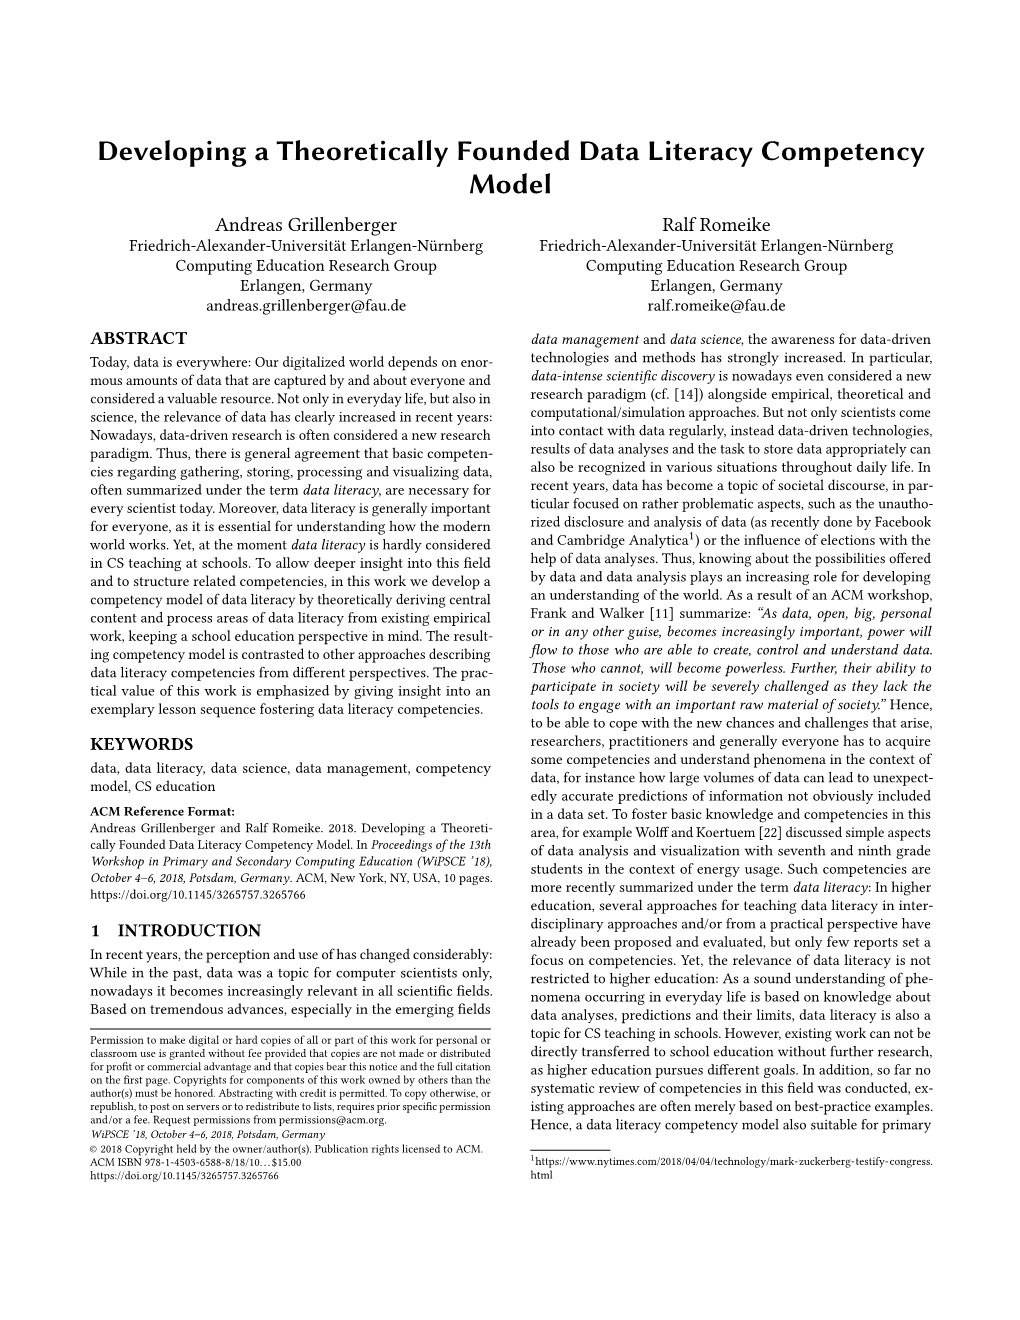 Developing a Theoretically Founded Data Literacy Competency Model